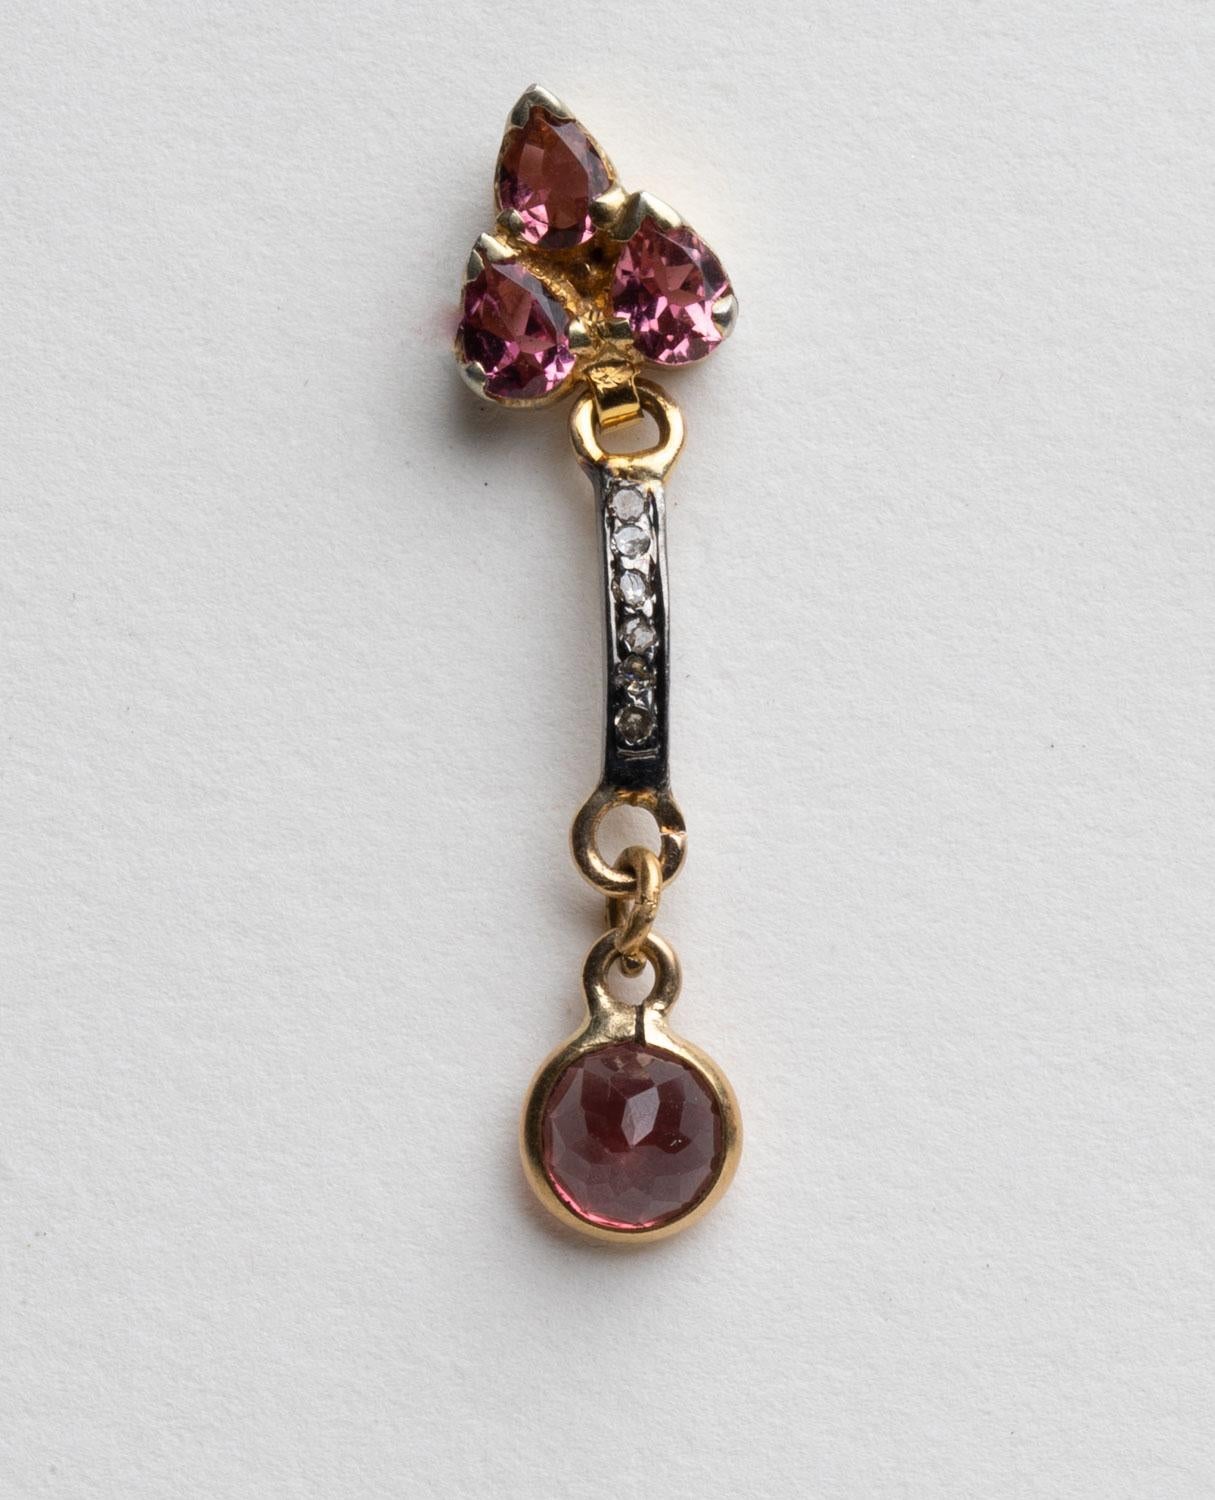 Three pear-shaped, faceted pink tourmalines are set in 18K gold on the earring's post.  A line of round, brilliant cut diamonds run down the spine of the earring, set in an oxidized sterling silver and the drop is a round, faceted pink tourmaline